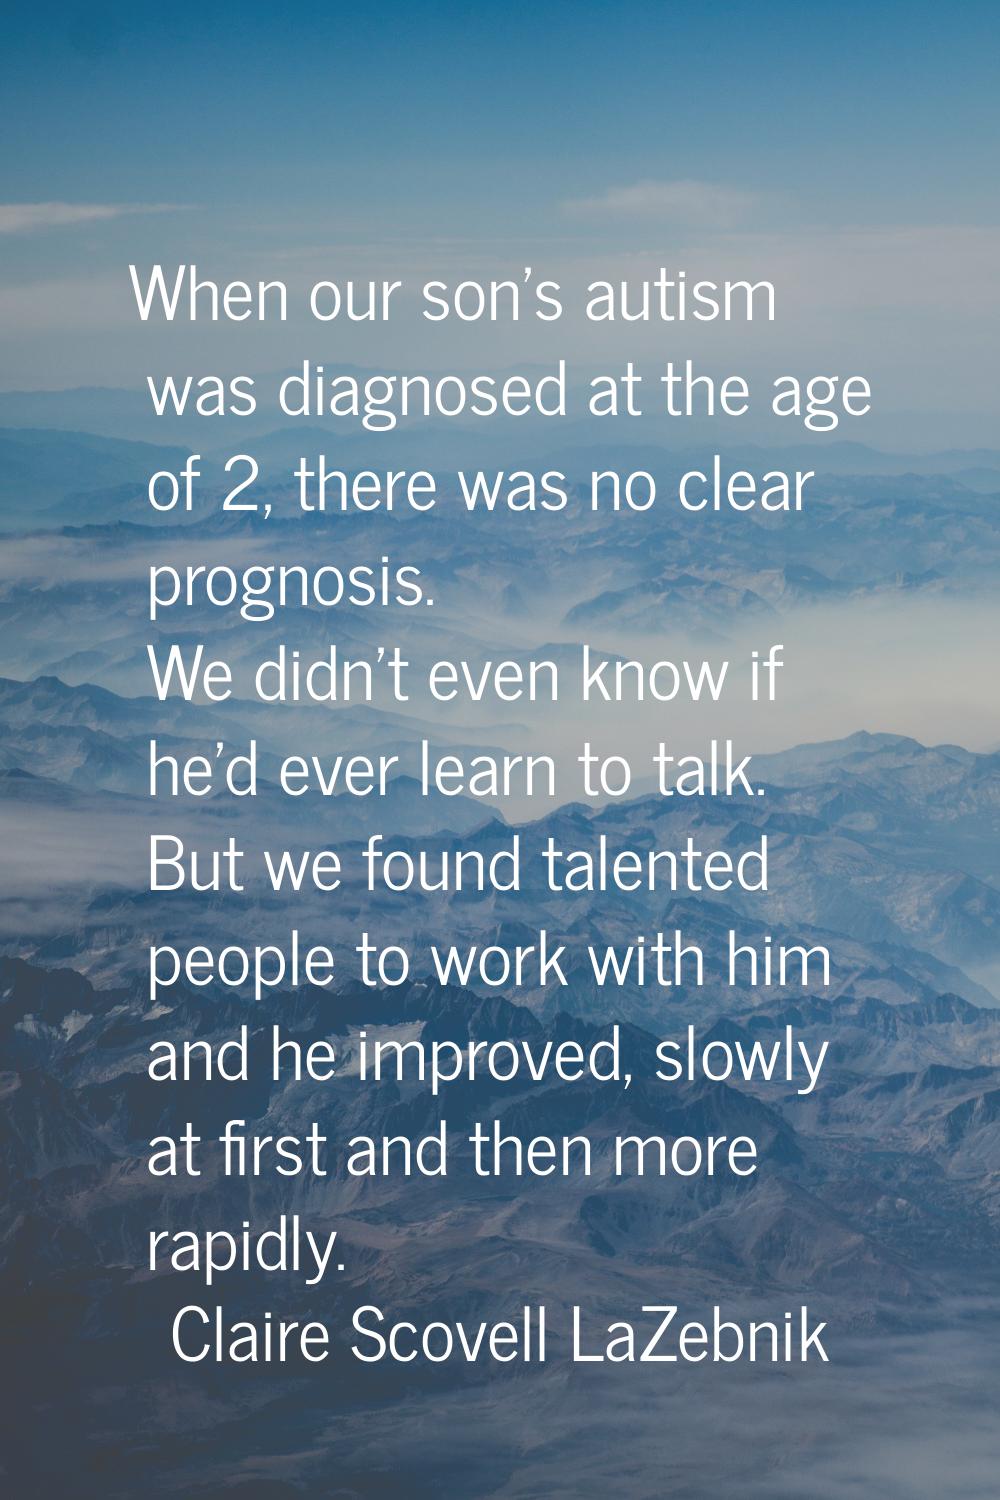 When our son's autism was diagnosed at the age of 2, there was no clear prognosis. We didn't even k